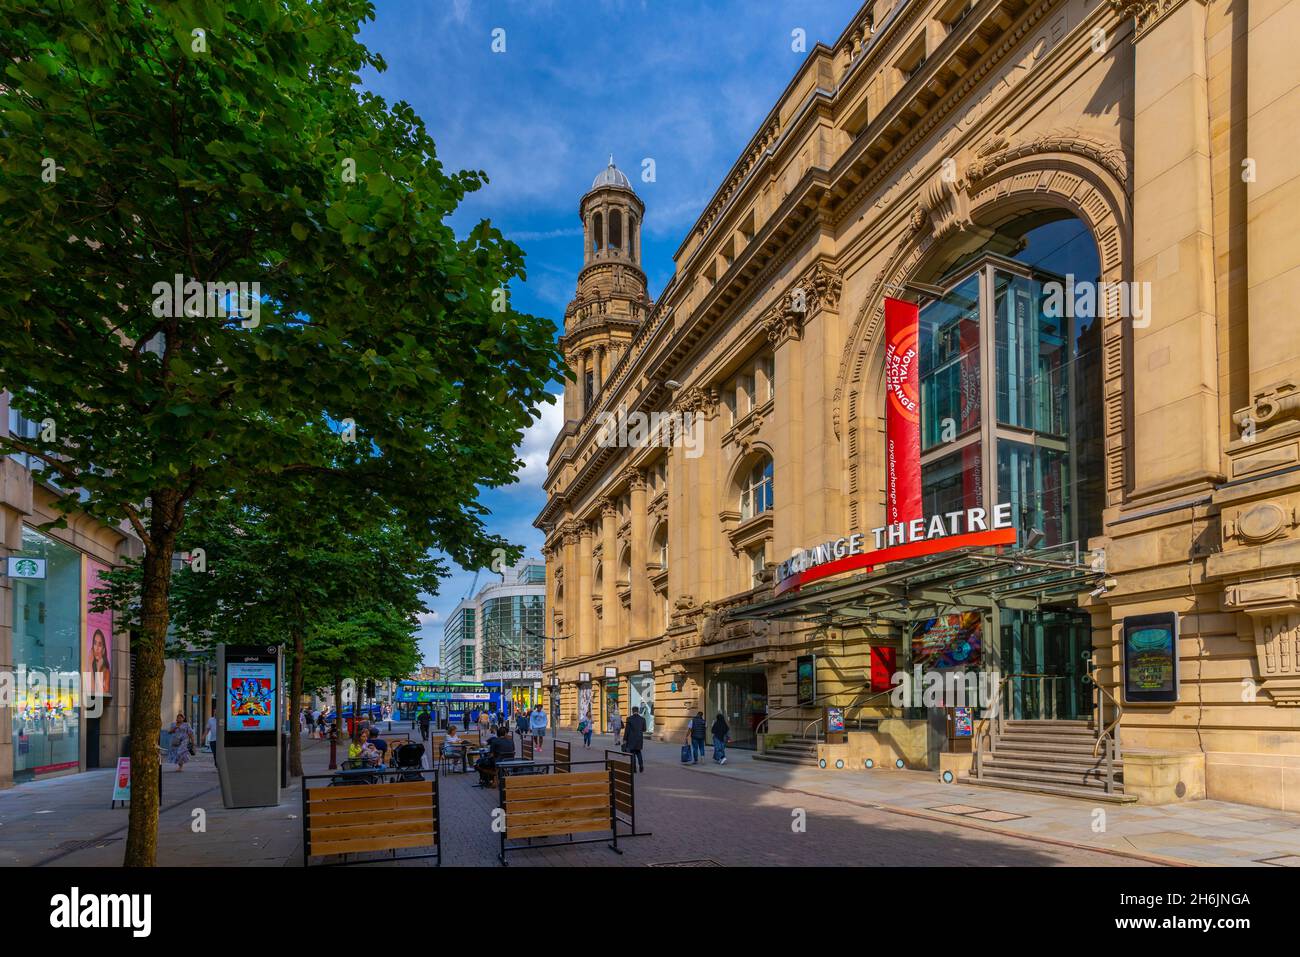 View of the Royal Exchange Theatre in St. Anne's Square, Manchester, Lancashire, England, United Kingdom, Europe Stock Photo